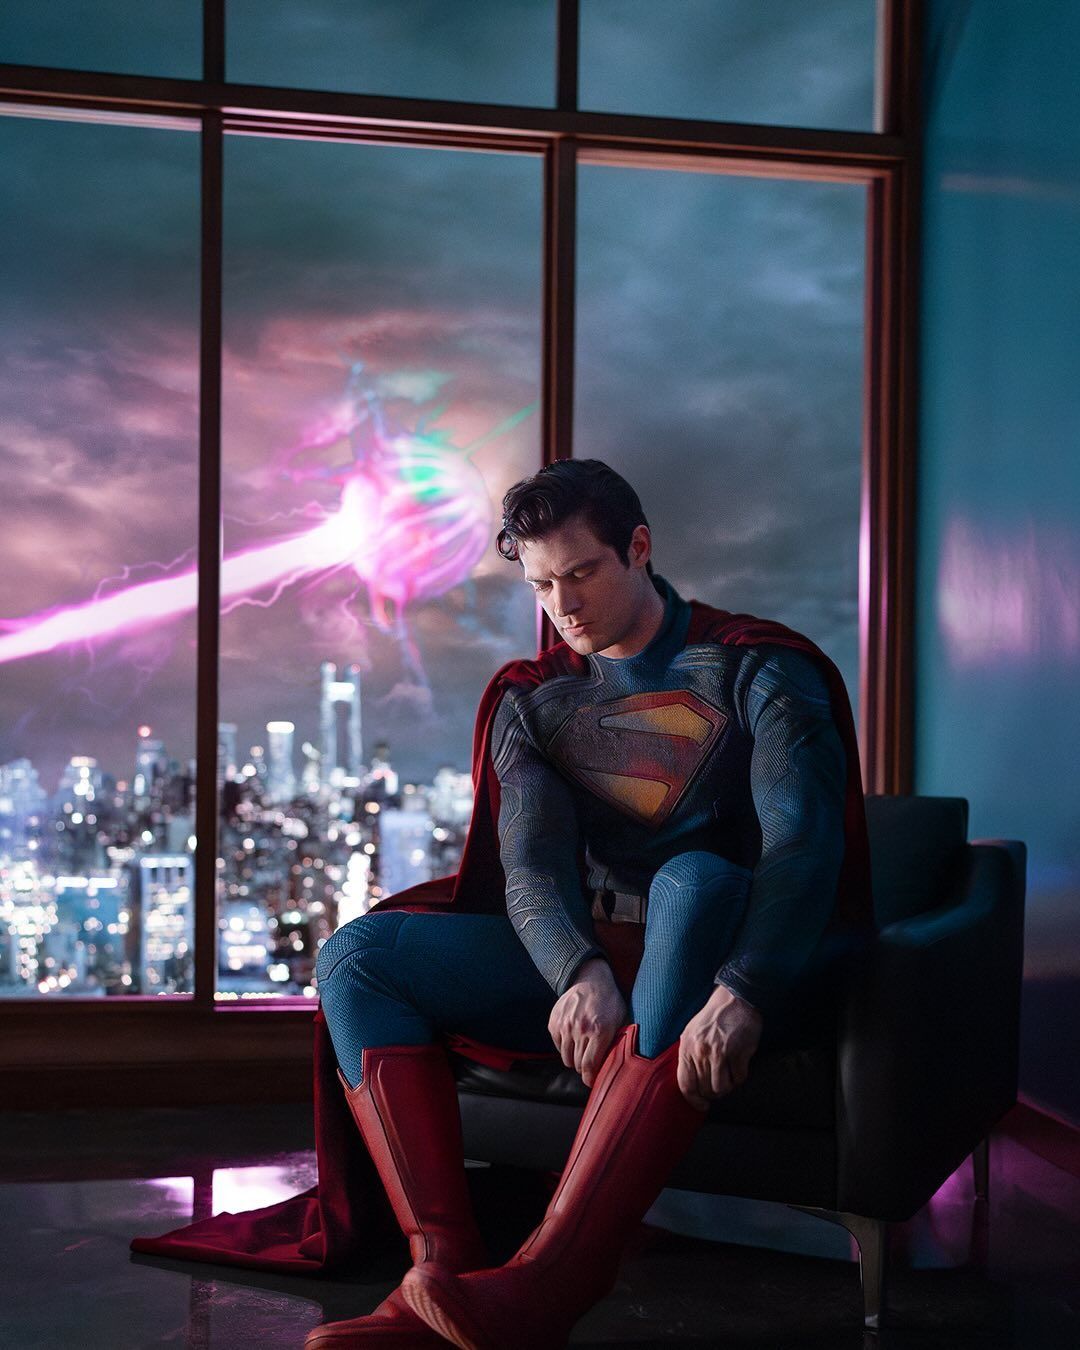 David Corenswet As Superman First Image Revealed: Battered Costume, Bright Red Boots... And An Alien Attack In The Sky